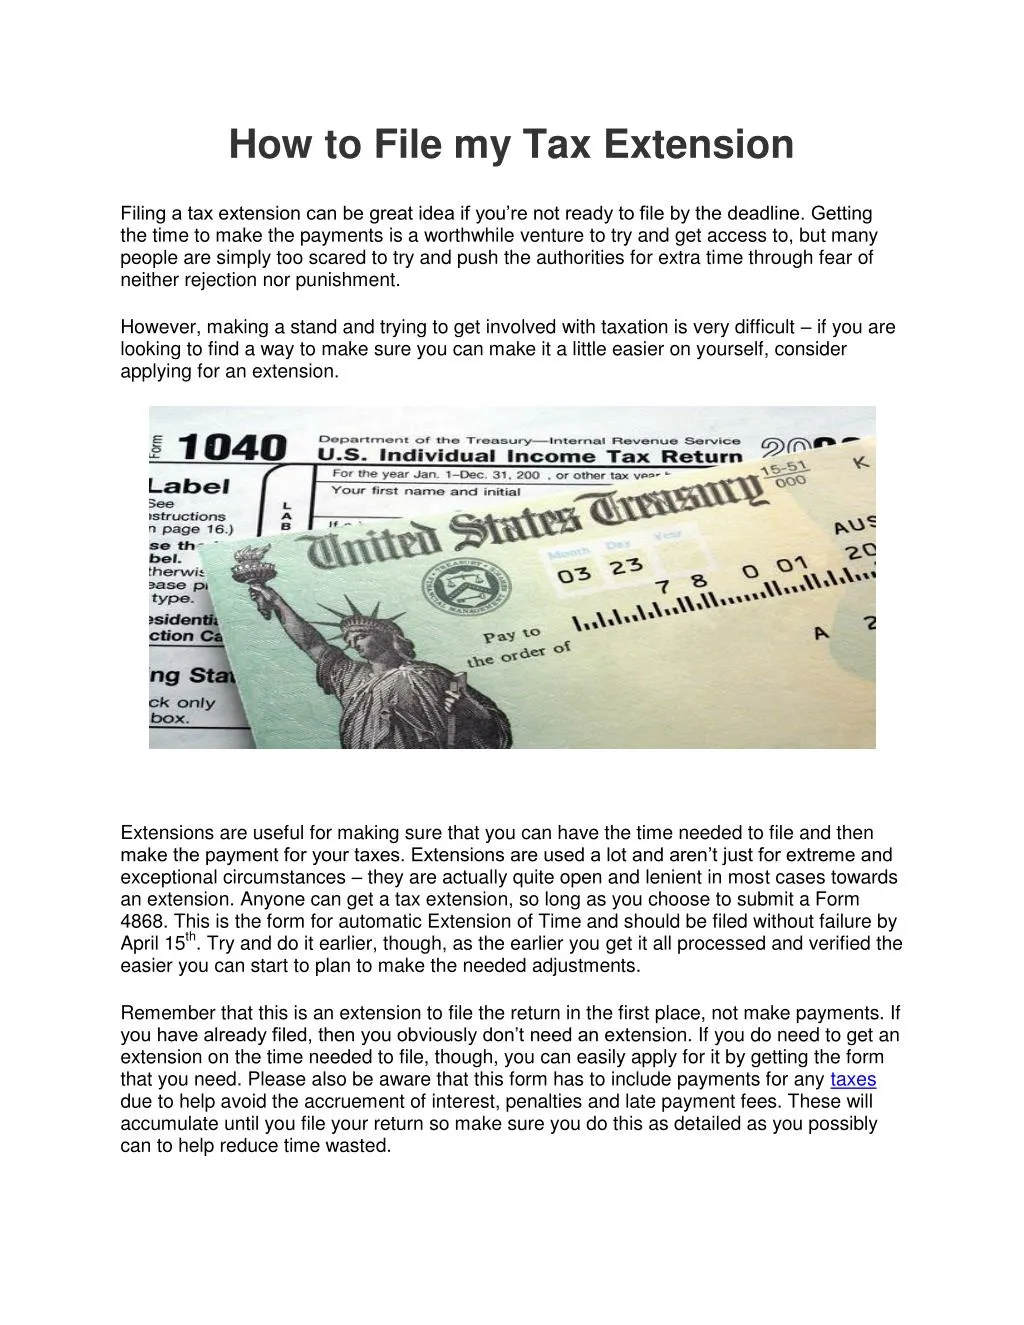 how to file my tax extension